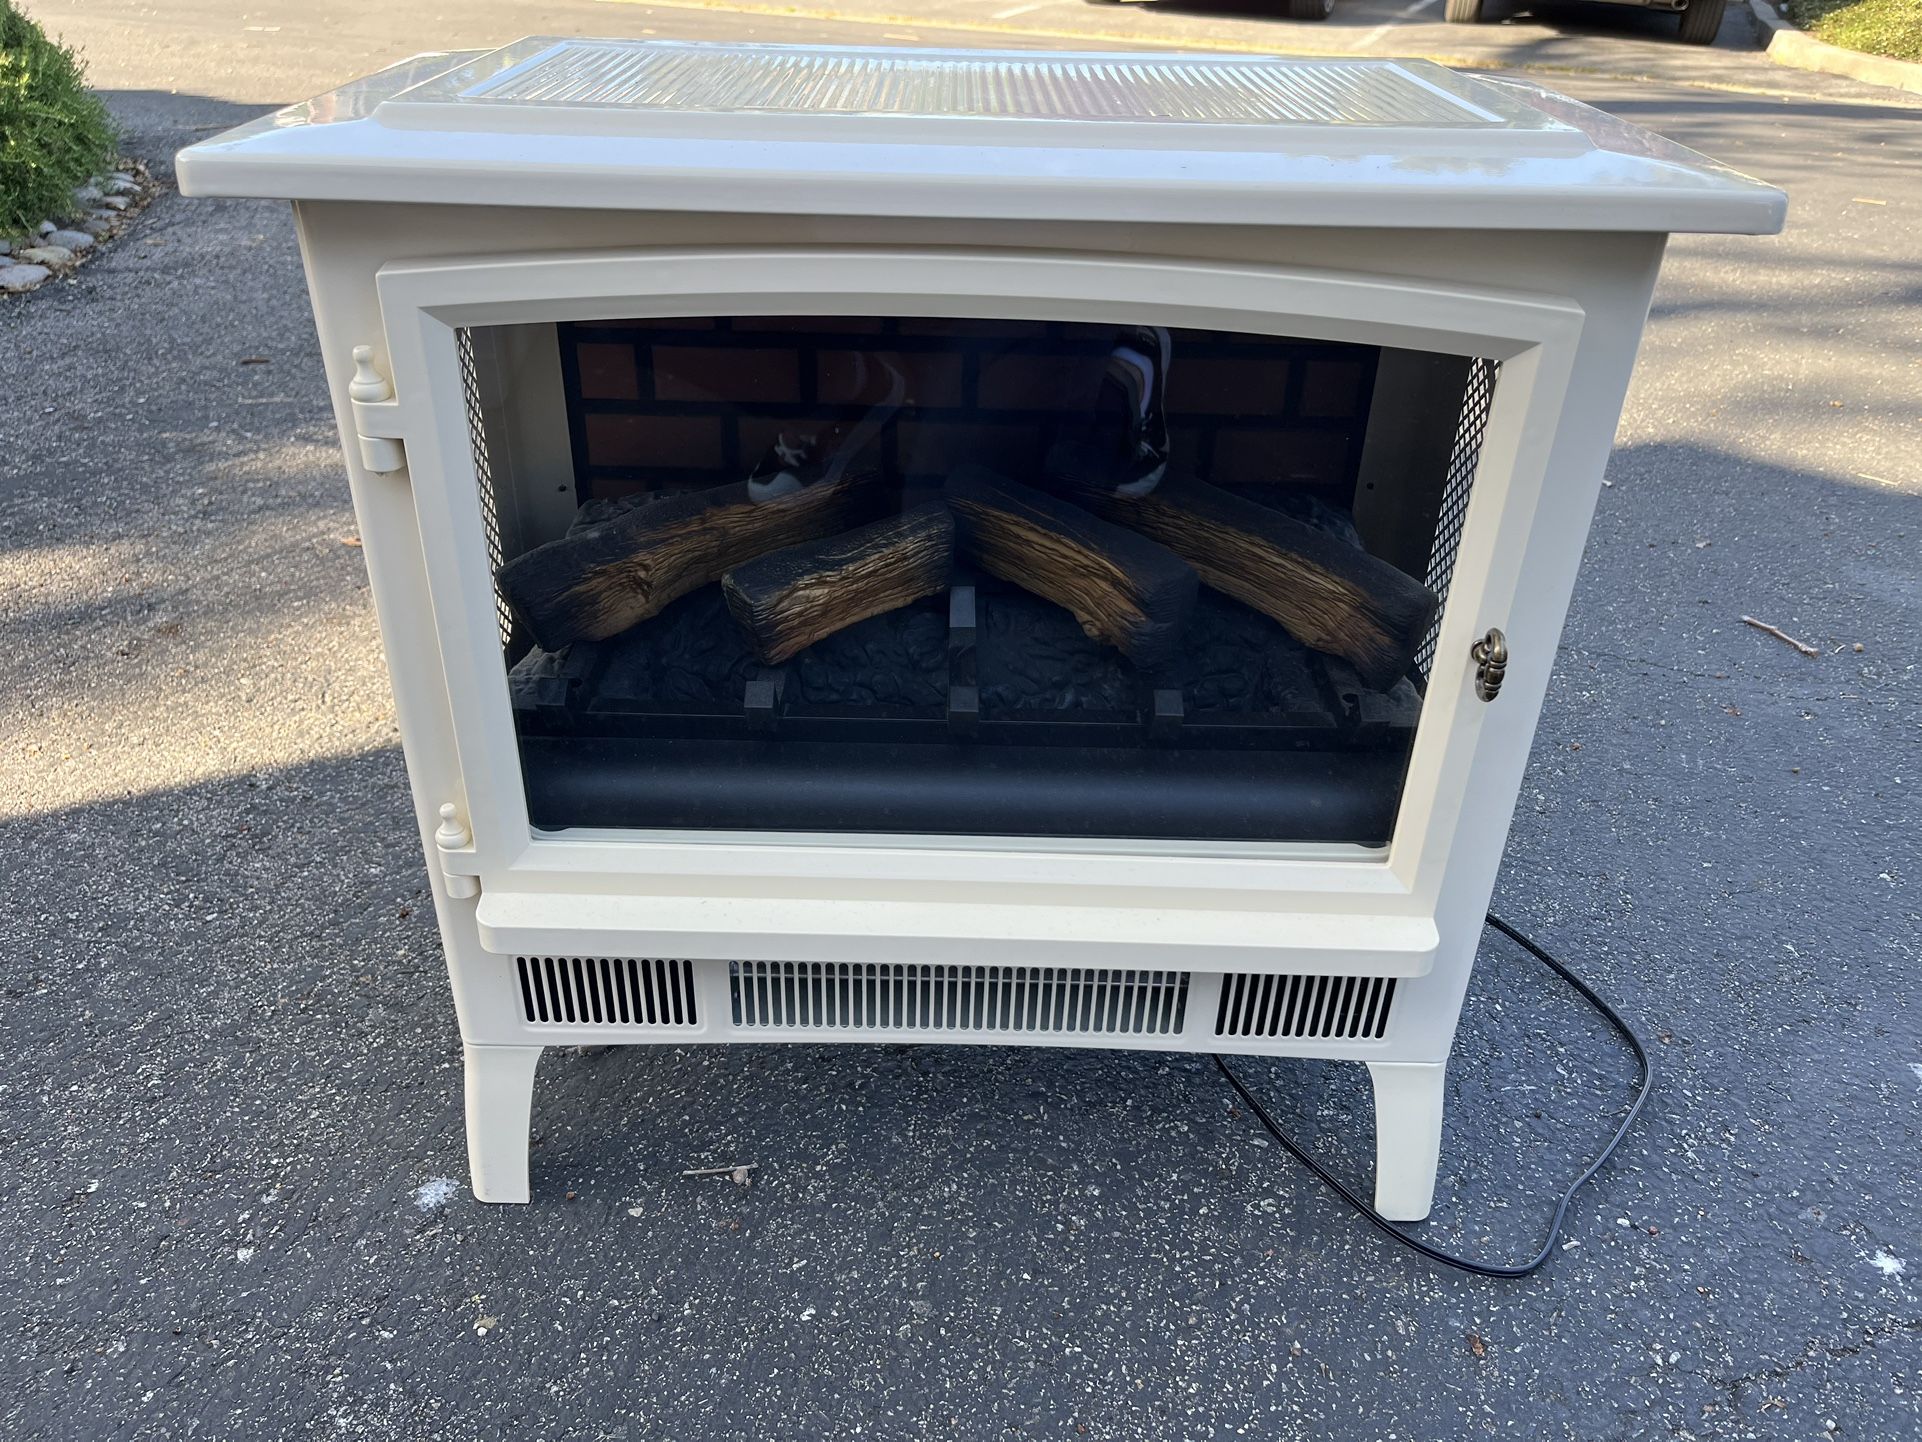 Portable fireplace heater $40